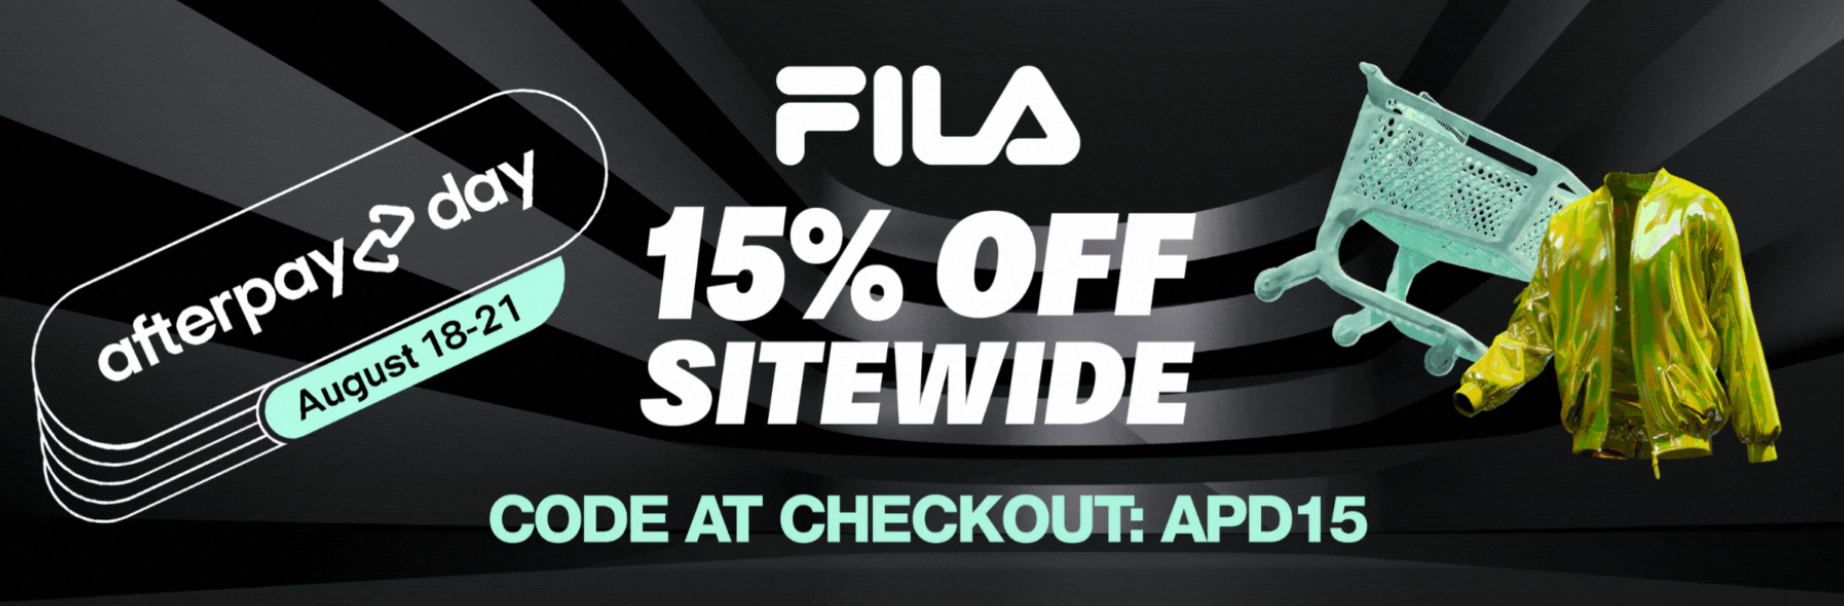 Up to 70% OFF + Extra 15% OFF sitewide with promo code at Fila